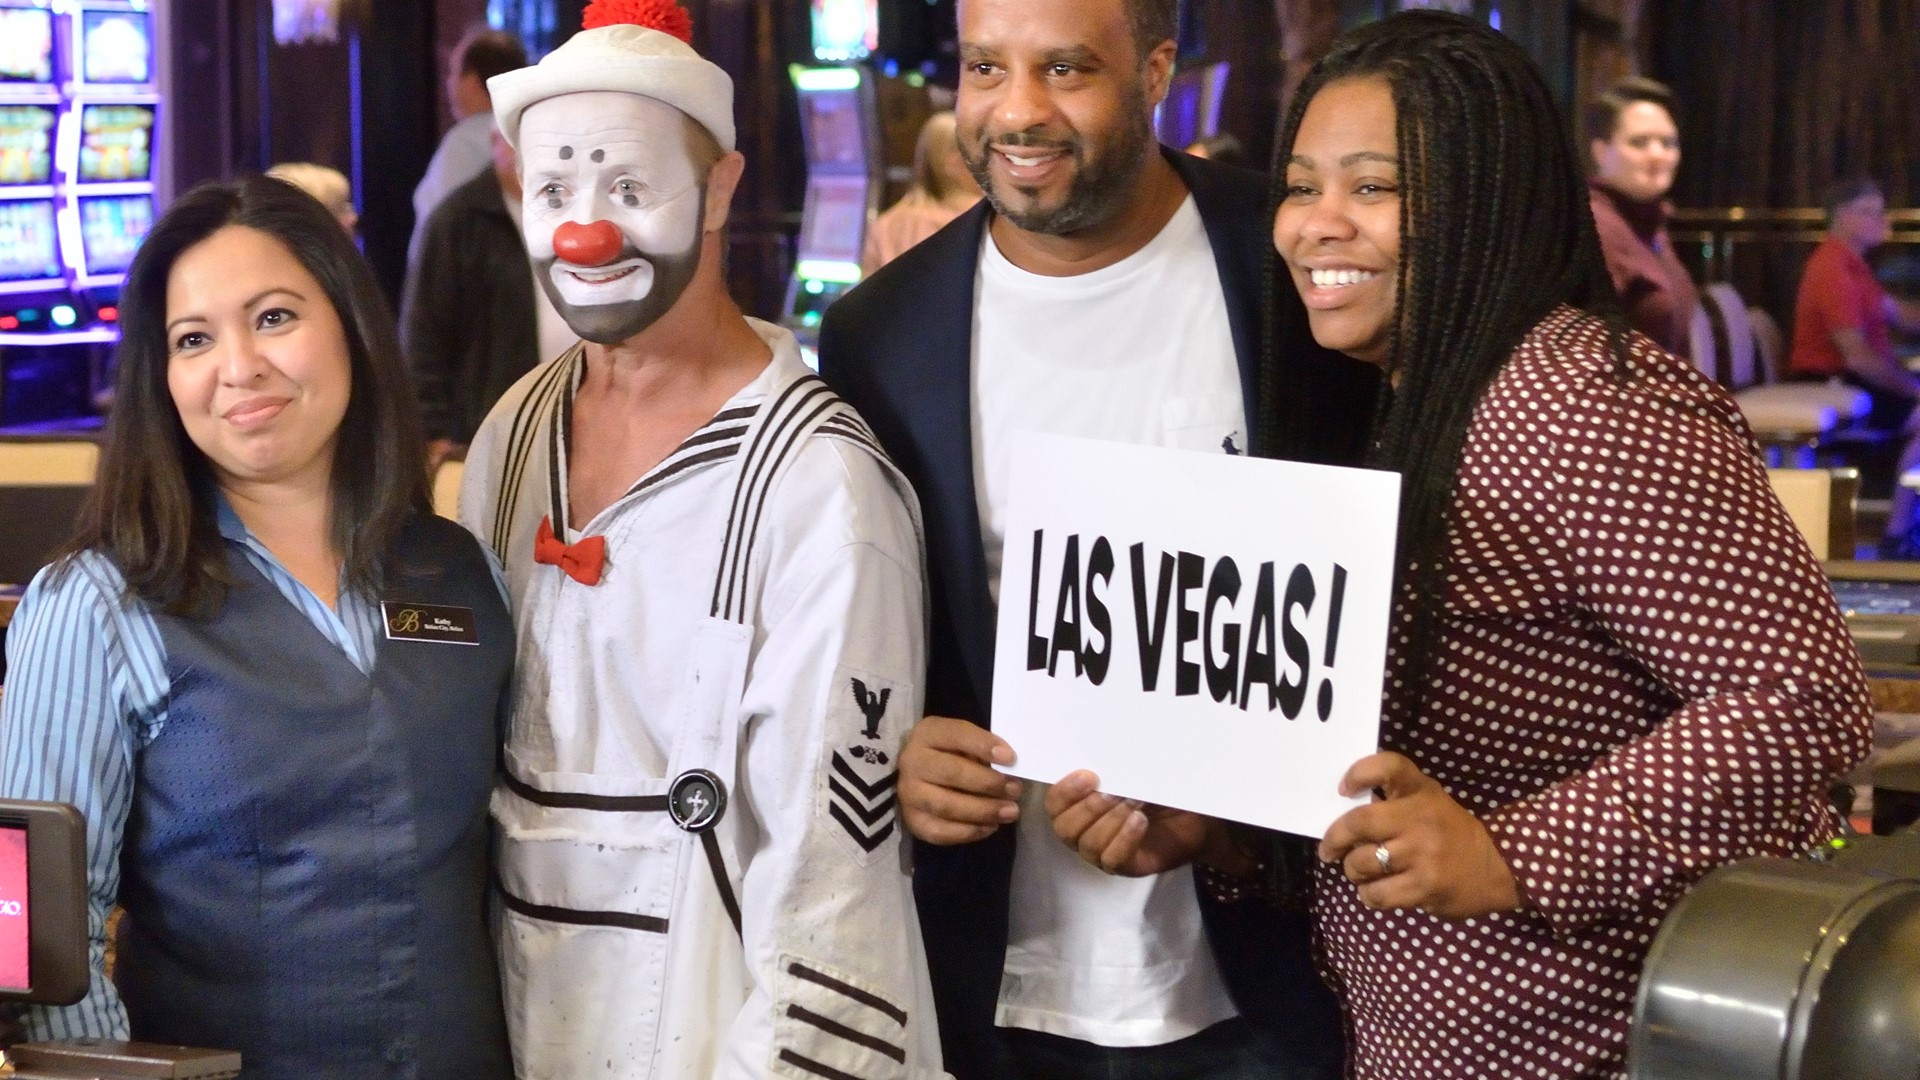 Clown from "O" by Cirque du Soleil surprises guests and Las Vegas employee with time off and free trips